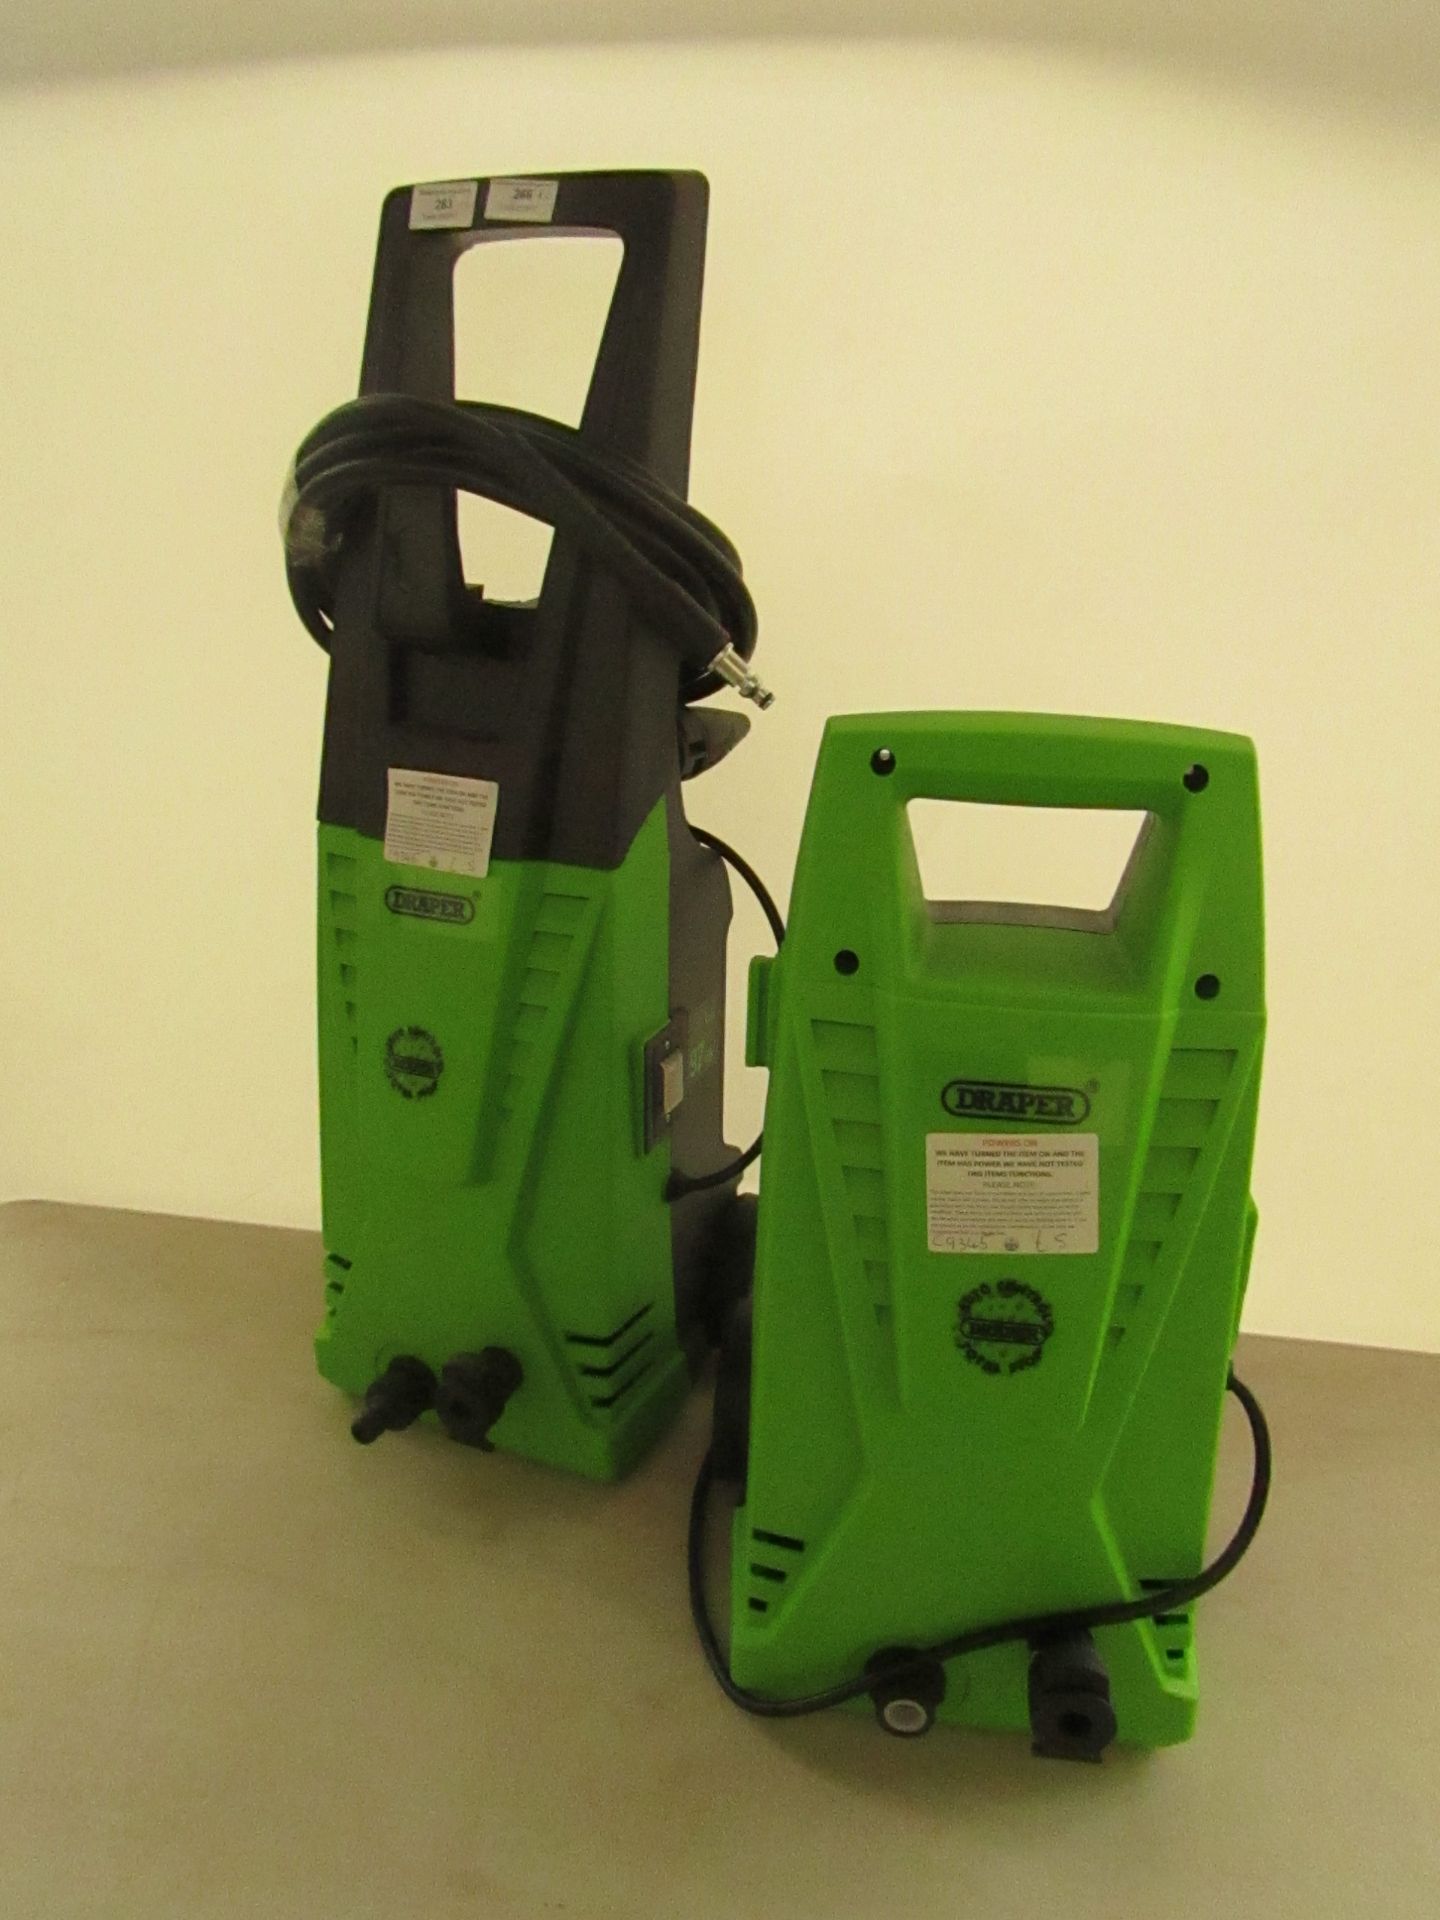 2x Draper pressure washers, both power on but missing various accessories.